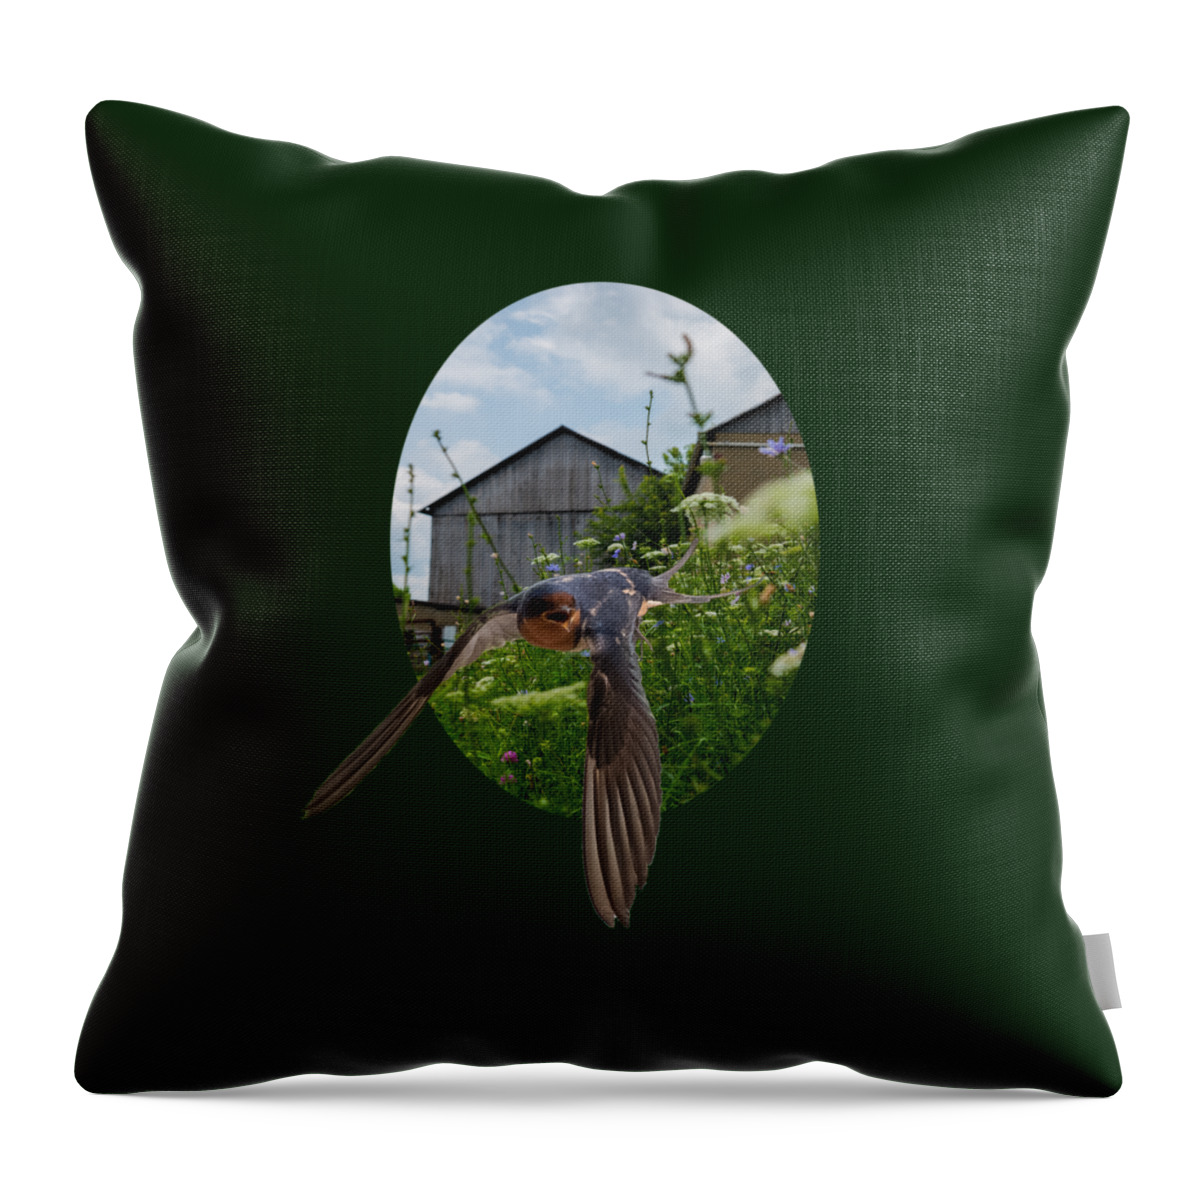 Barn Throw Pillow featuring the photograph Flying Through The Farm by Holden The Moment